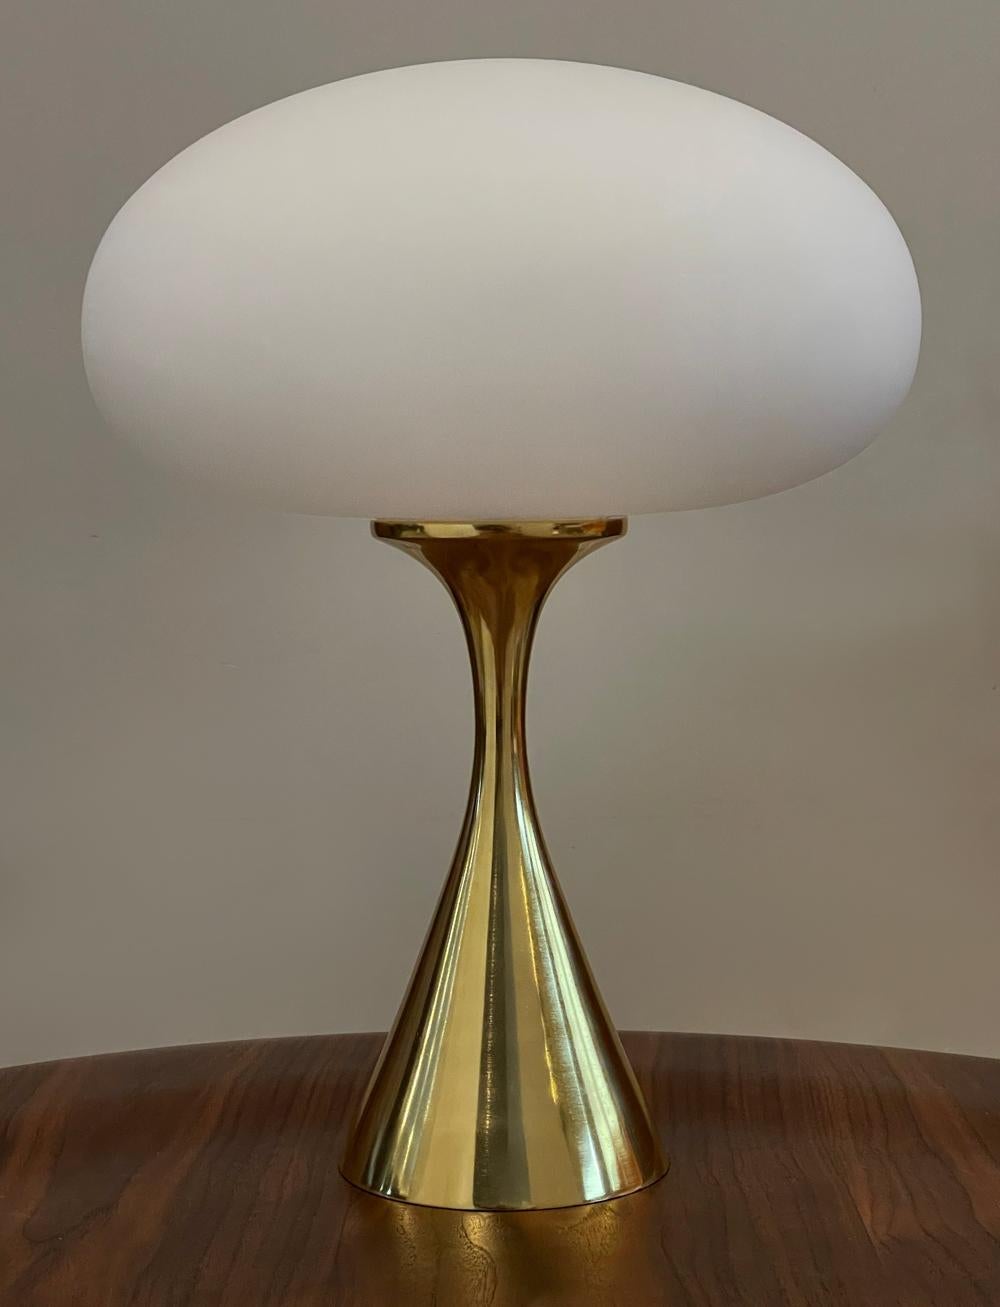 Pair of Mid-Century Modern Table Lamps by Designline in Brass & White Glass For Sale 1